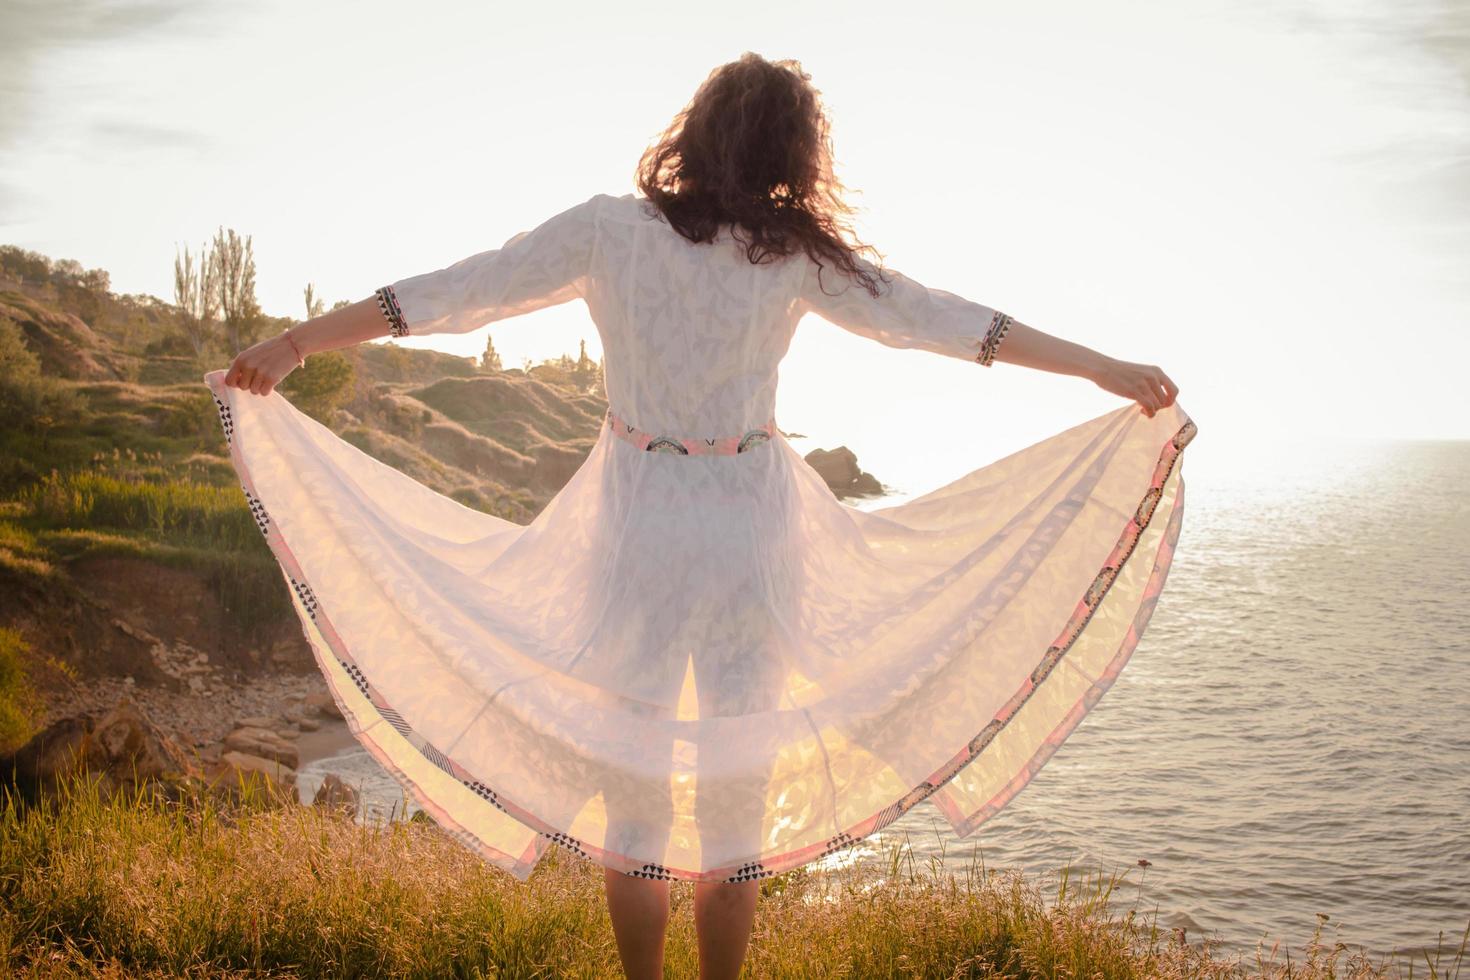 young woman walking on the morning beach in beautiful white dress. Fit female having good time during turing the sunrise. photo